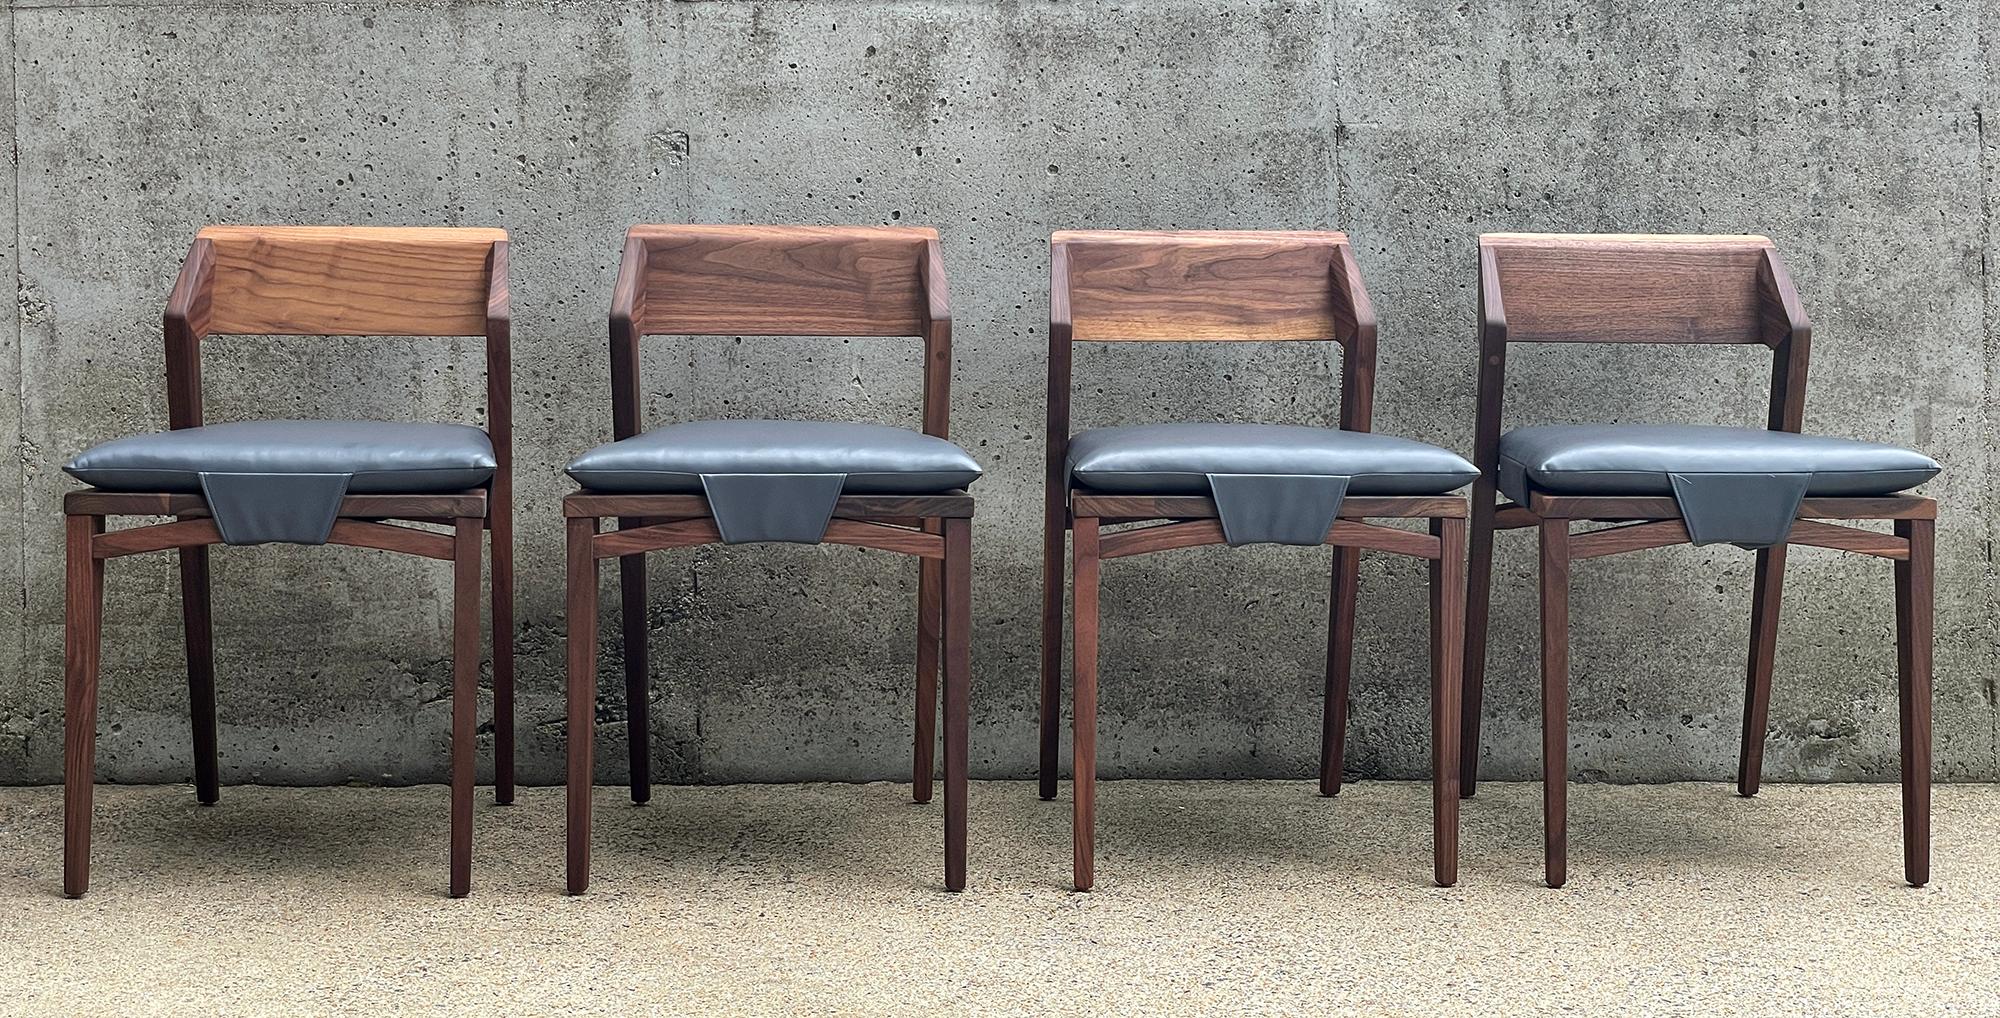 American Modern Dining Chair, Osteria Side Chair, Leather Cushion by MarCo Bogazzi For Sale